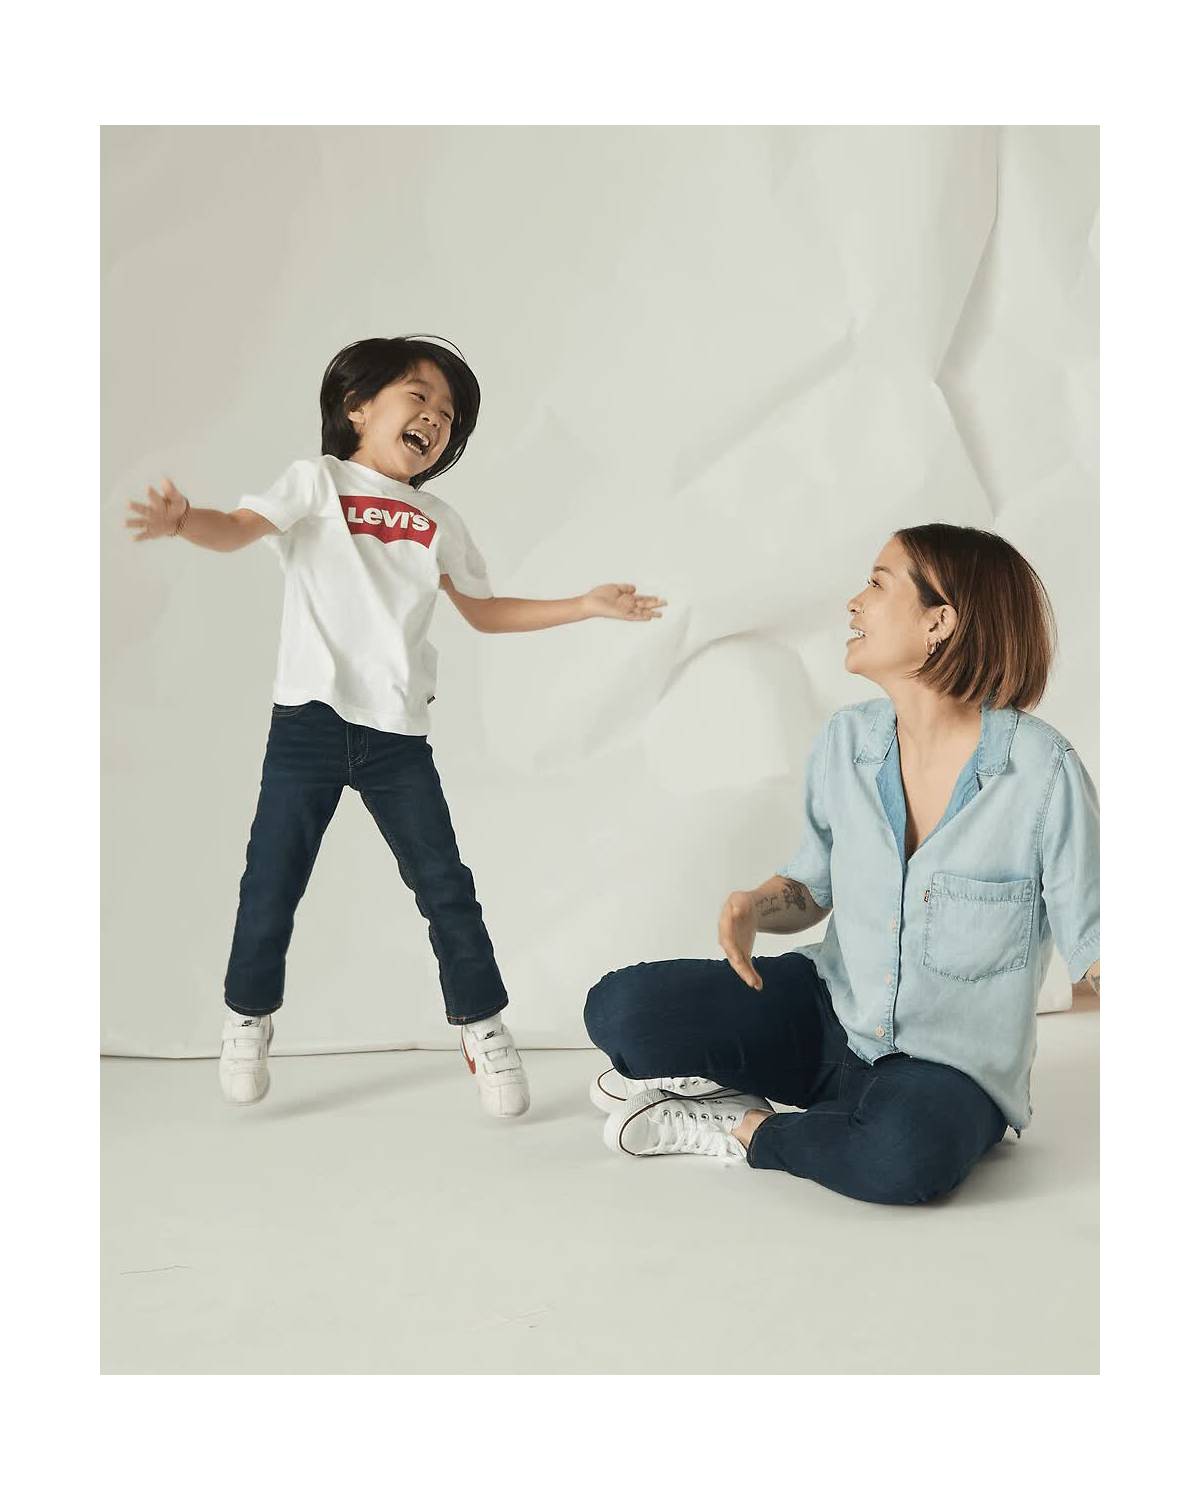 Rotating imagery of kid jumping next their mom in assorted Levi's styles